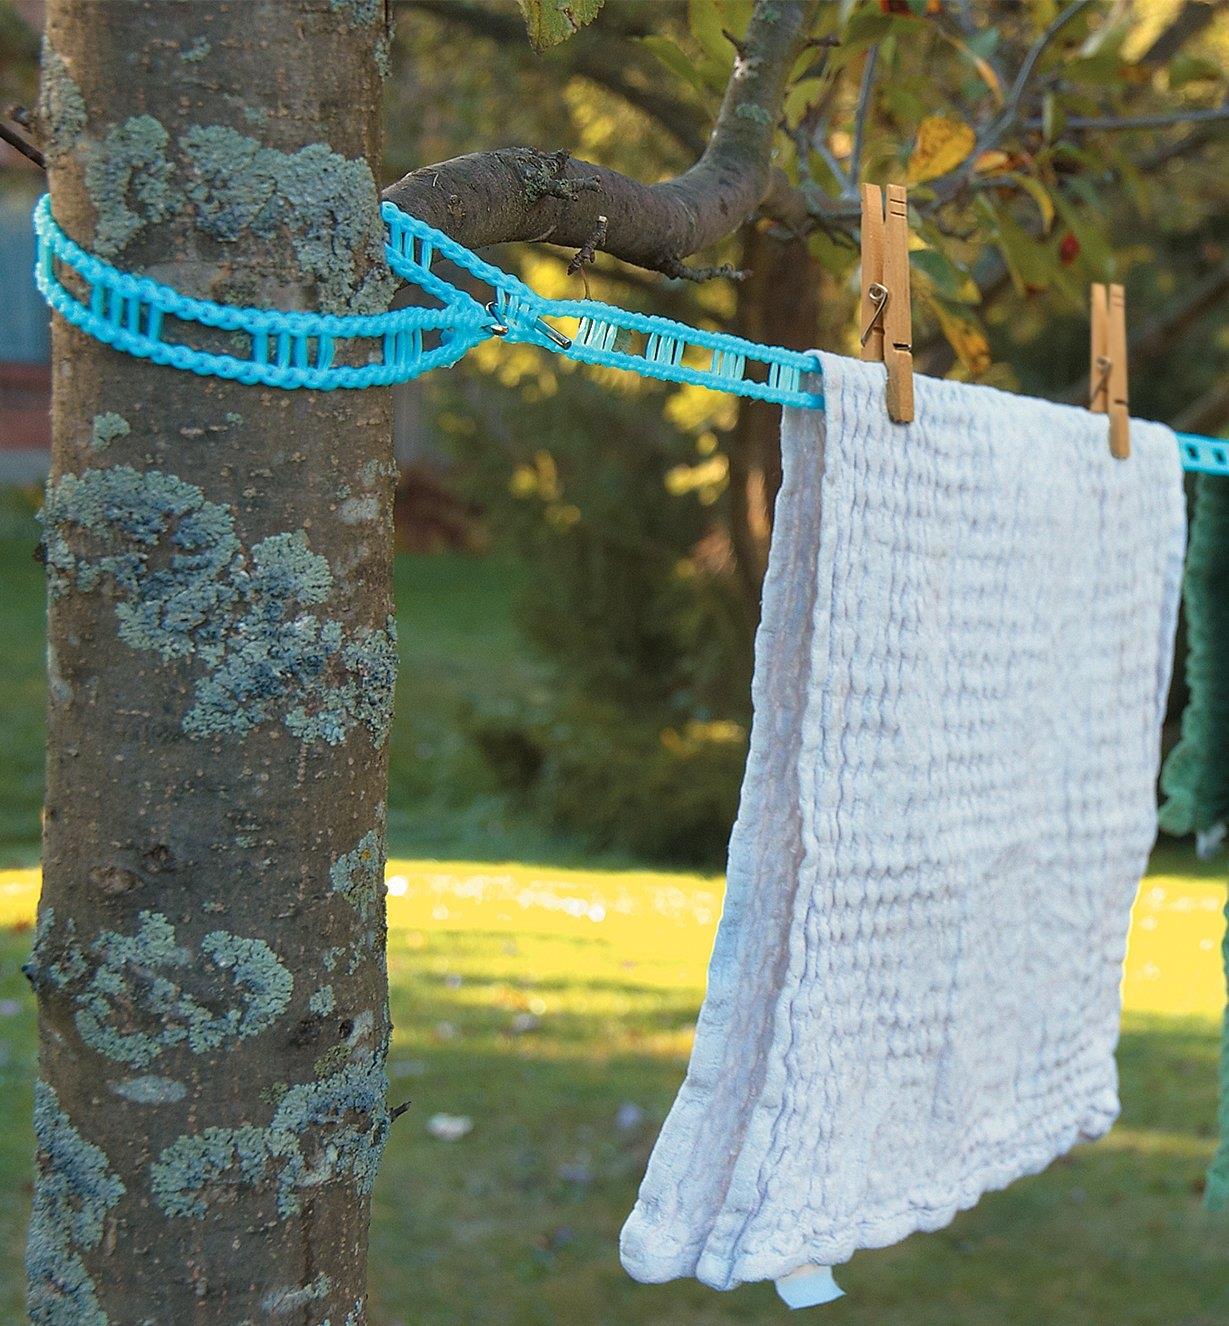 Hook-Anywhere Clothesline attached to a tree with a towel clipped on with clothespins